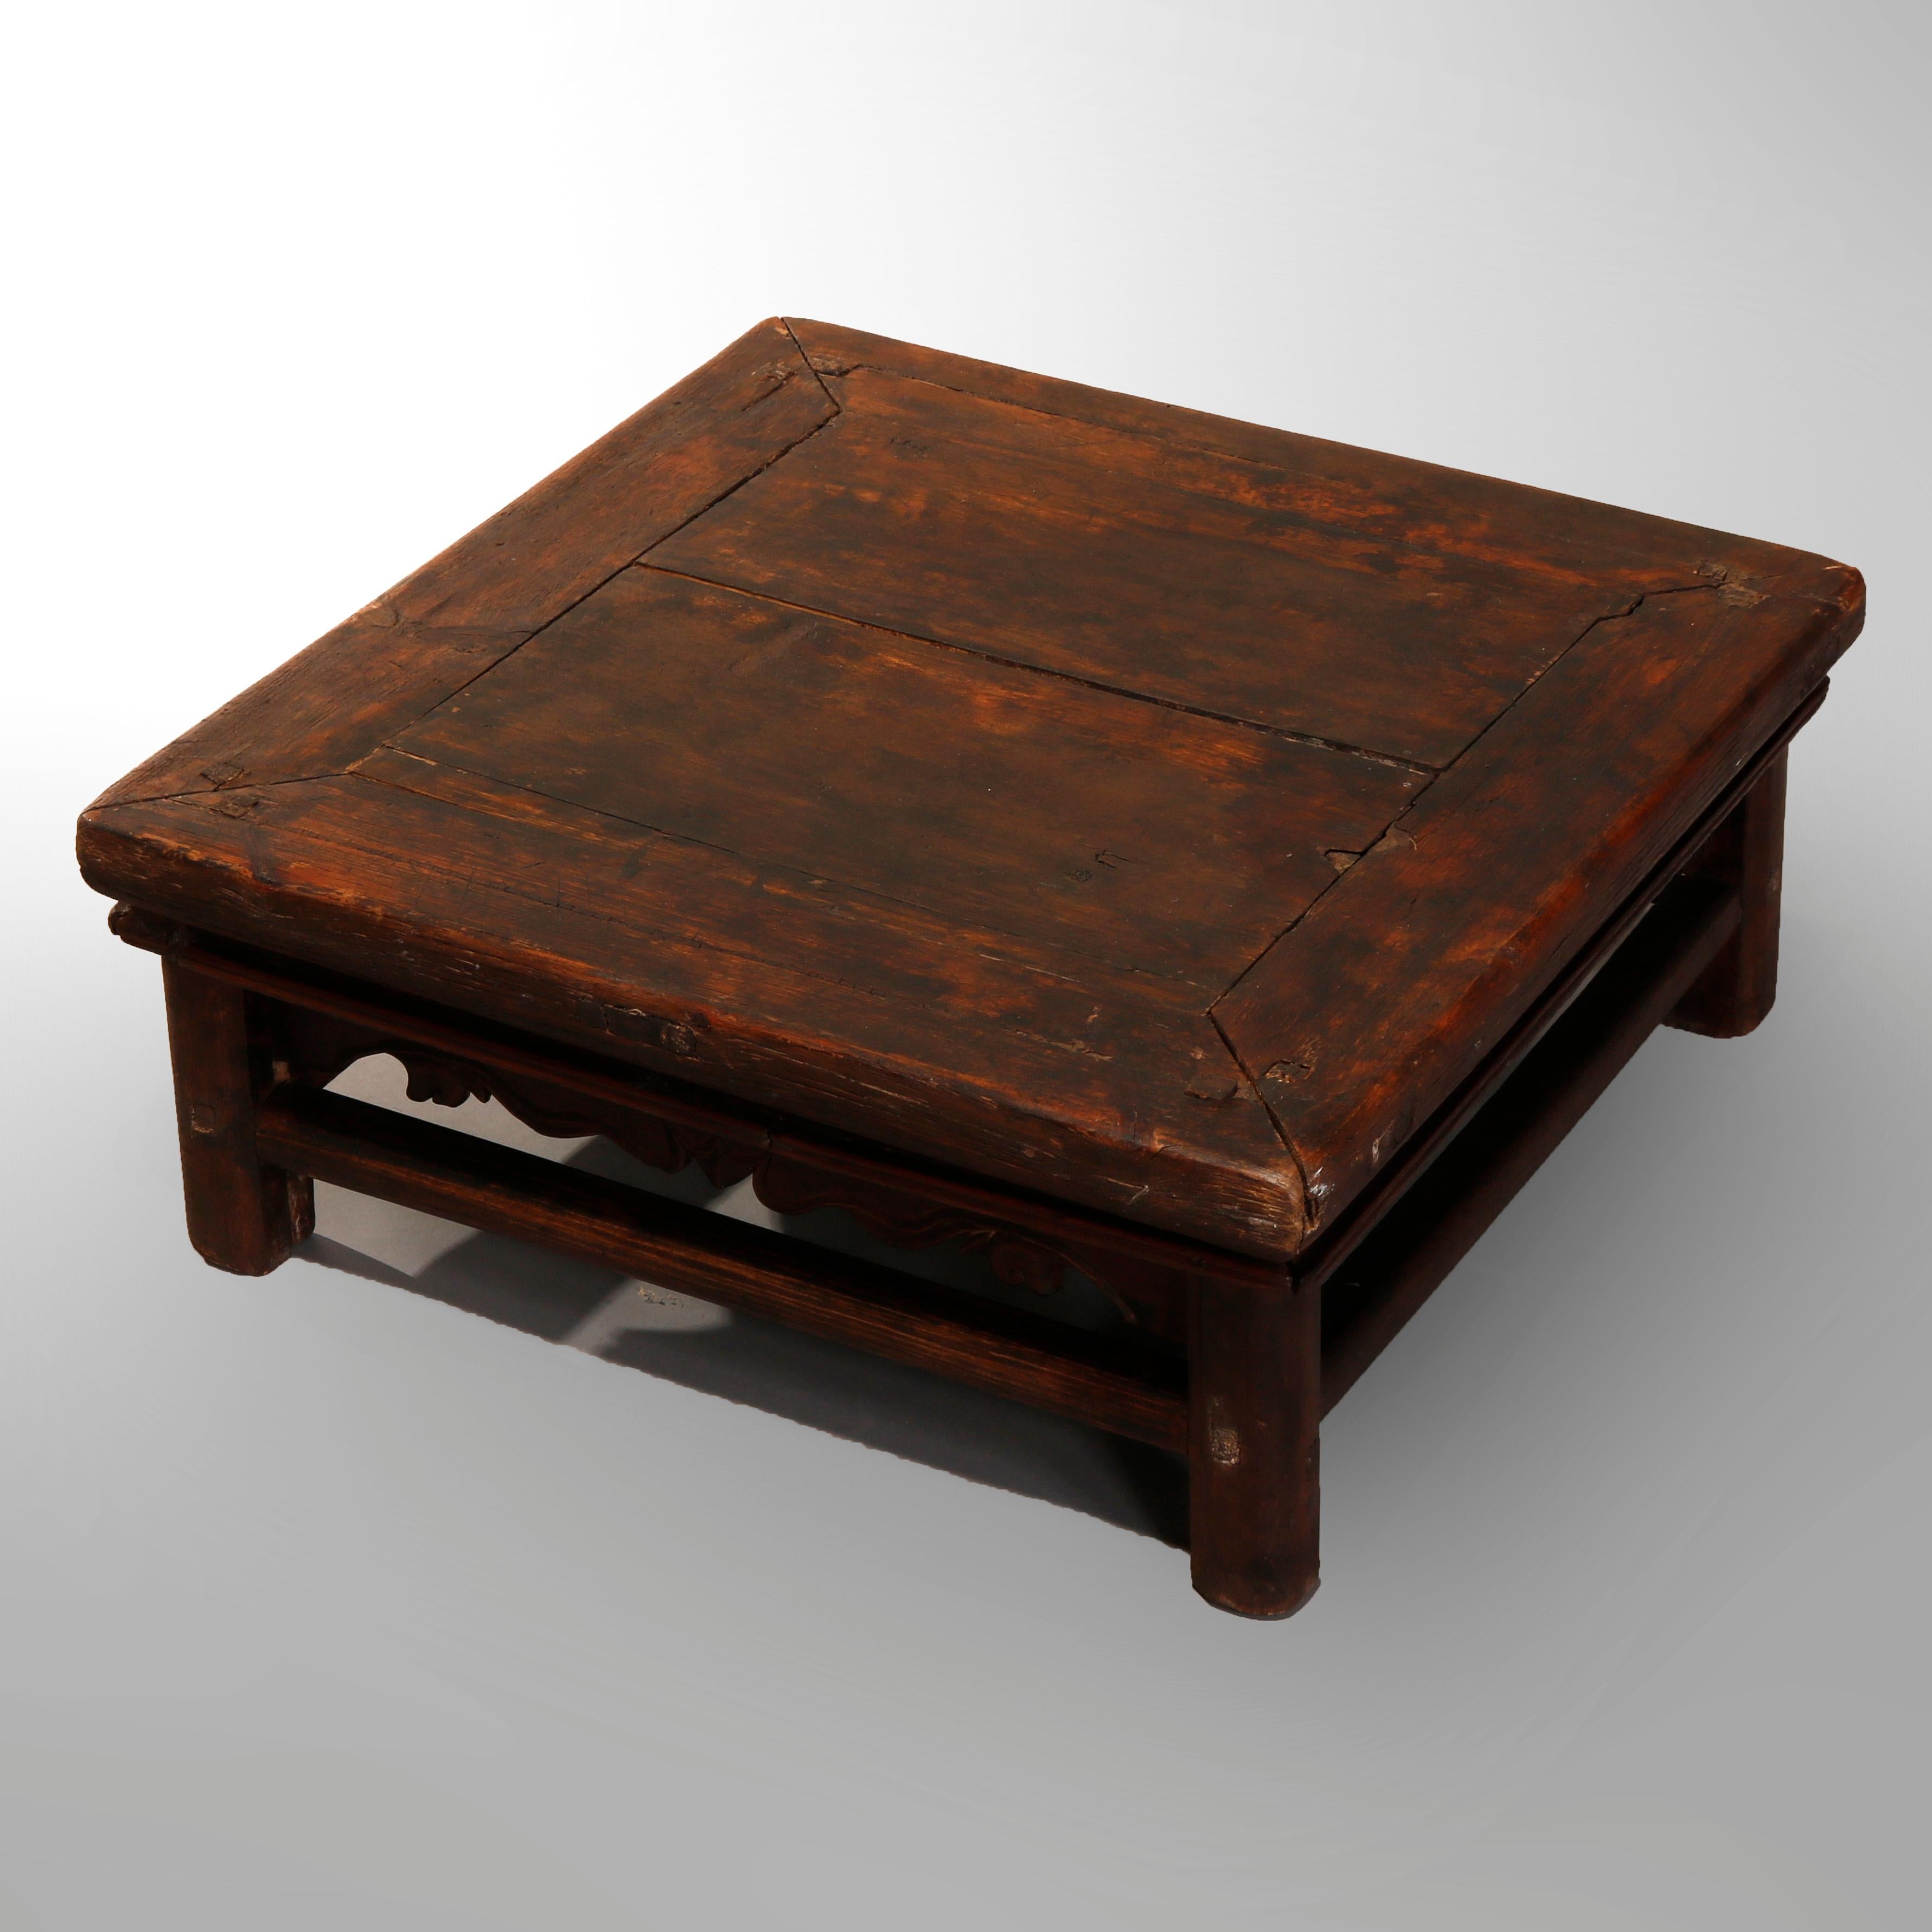 An antique Chinese low table offers pegged hardwood construction with top surmounting foliate hand carved skirt, raised on straight legs, 19th century

Measures: 10.25